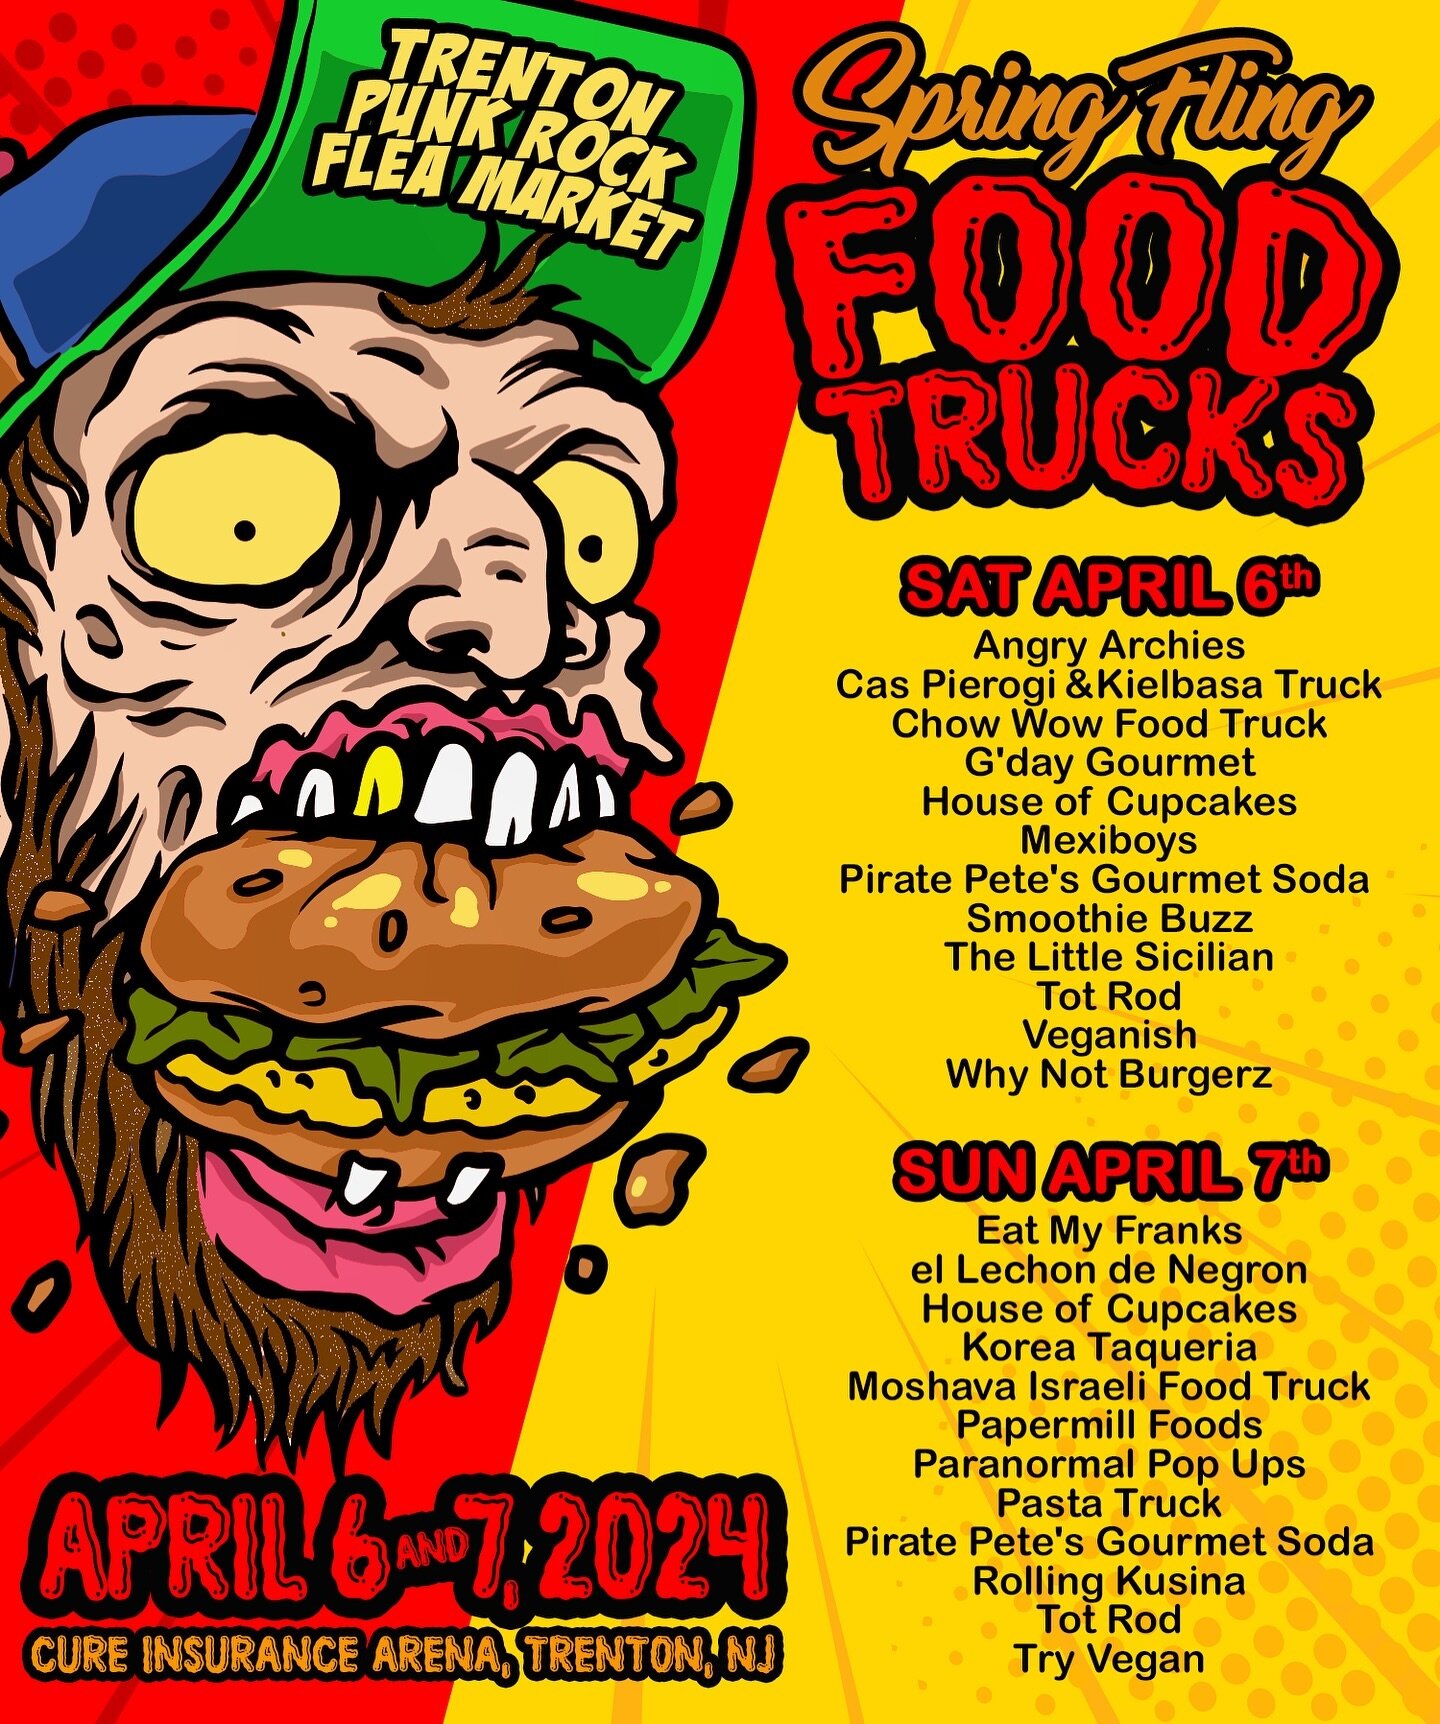 🍔🌮🍕 THE MOUTHWATERING TPRFM FOOD TRUCK LINE UP IS HERE! 🍕🌮🍔

The TPRFM is always cooking up something fresh which is why we&rsquo;re always so stoked on our food truck offerings that&rsquo;ll help fuel you during the marathon weekend that is th